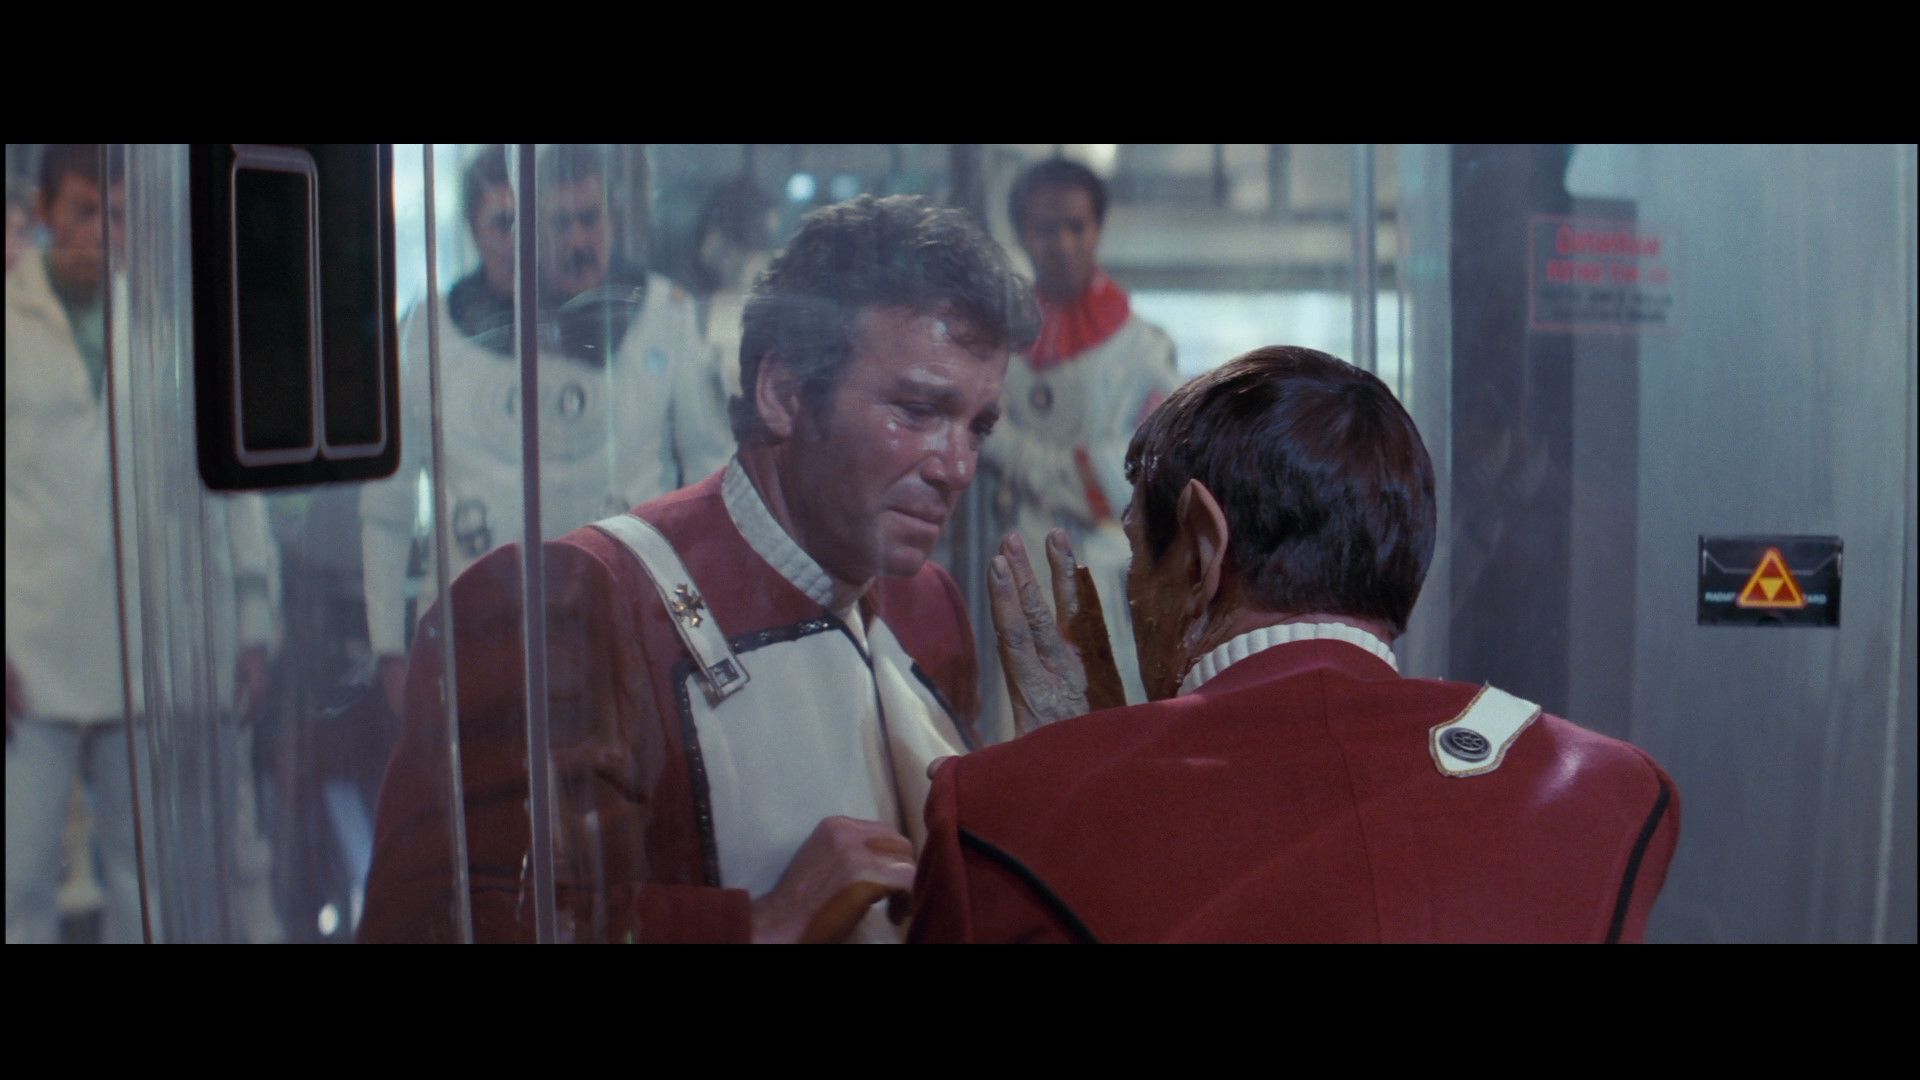 Captain Kirk, played by William Shatner, and Spock, played by Leonard Nimoy, in the movie Star Trek II: The Wrath of Khan. Spock, whose skin is peeling makes his iconic Vulcan salute against the glass that divides the two men.